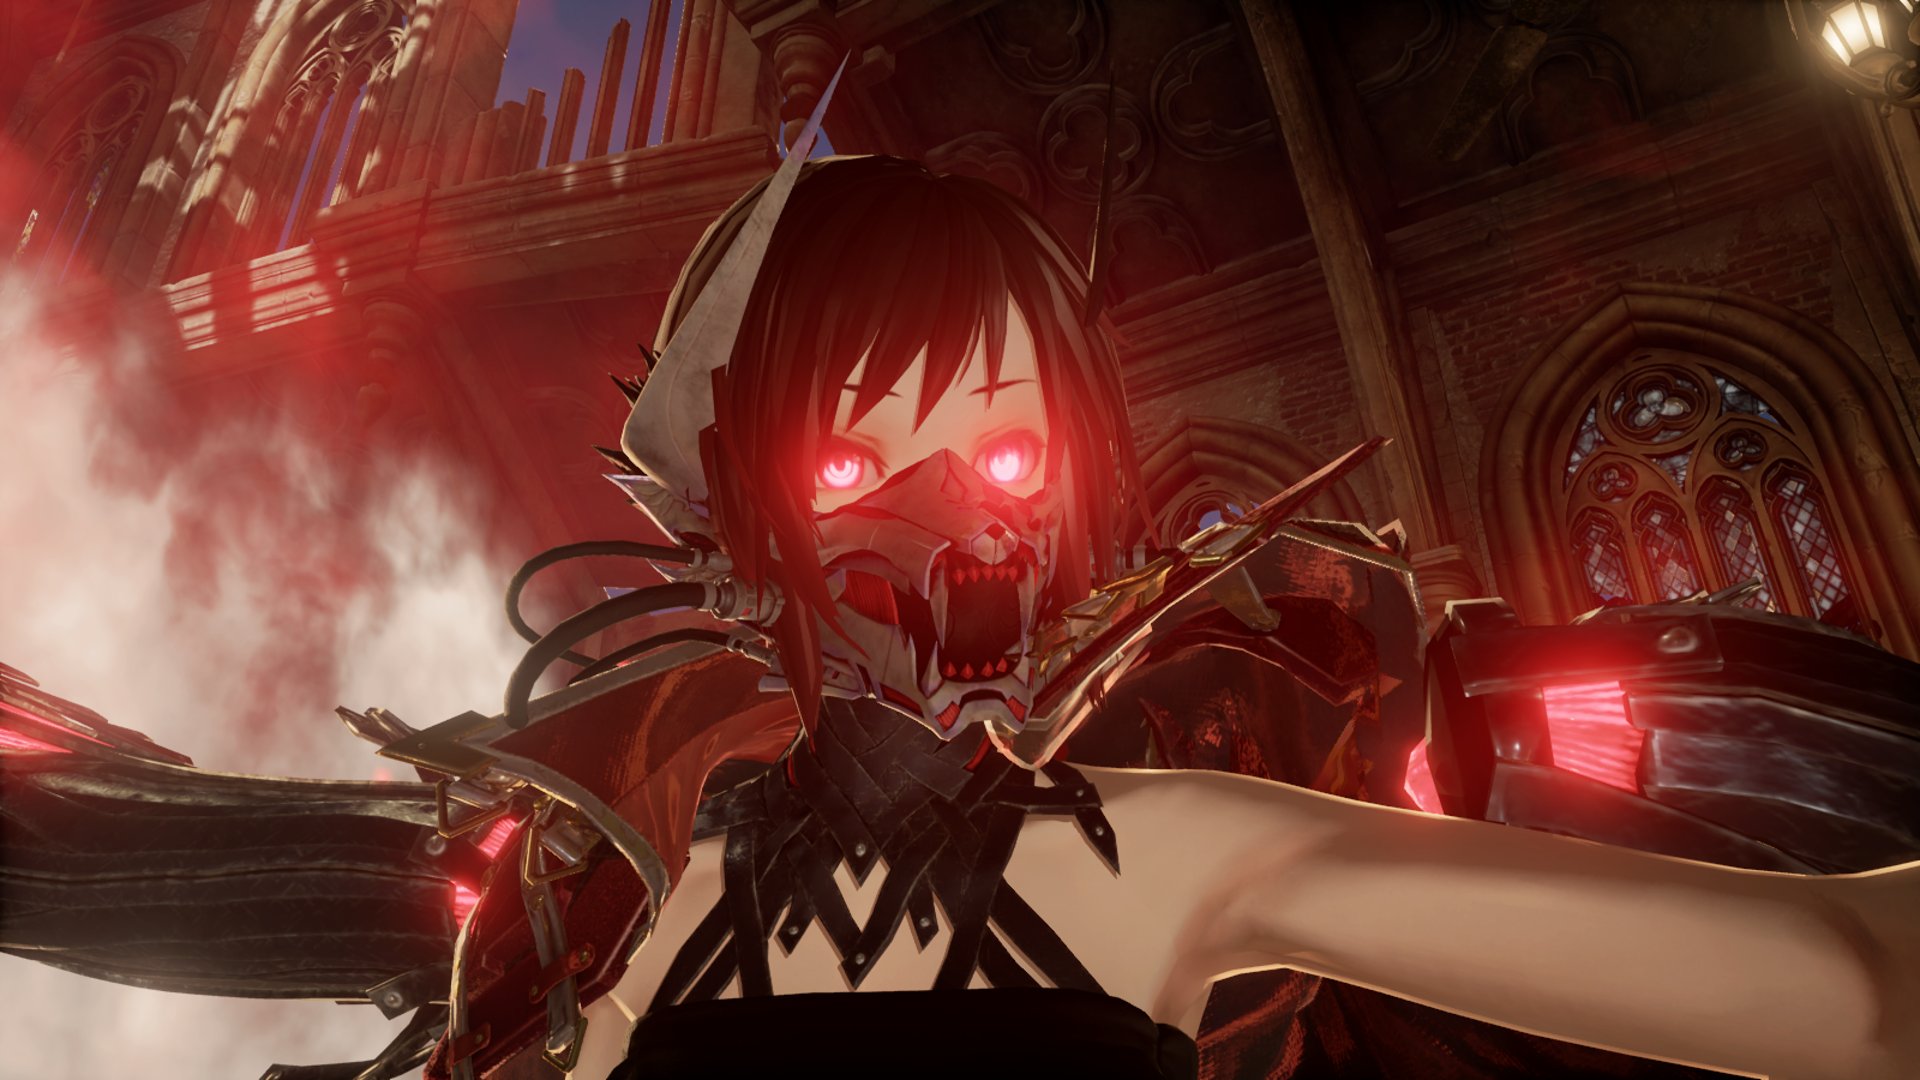 💀 DarkBlood Anime Demon 🩸 on X: "Code Vein All 4 Blood Veil masks. Orge,  Stinger, Hounds and Ivy. Looks I caught it fast. https://t.co/NuJDADsQyA" /  X